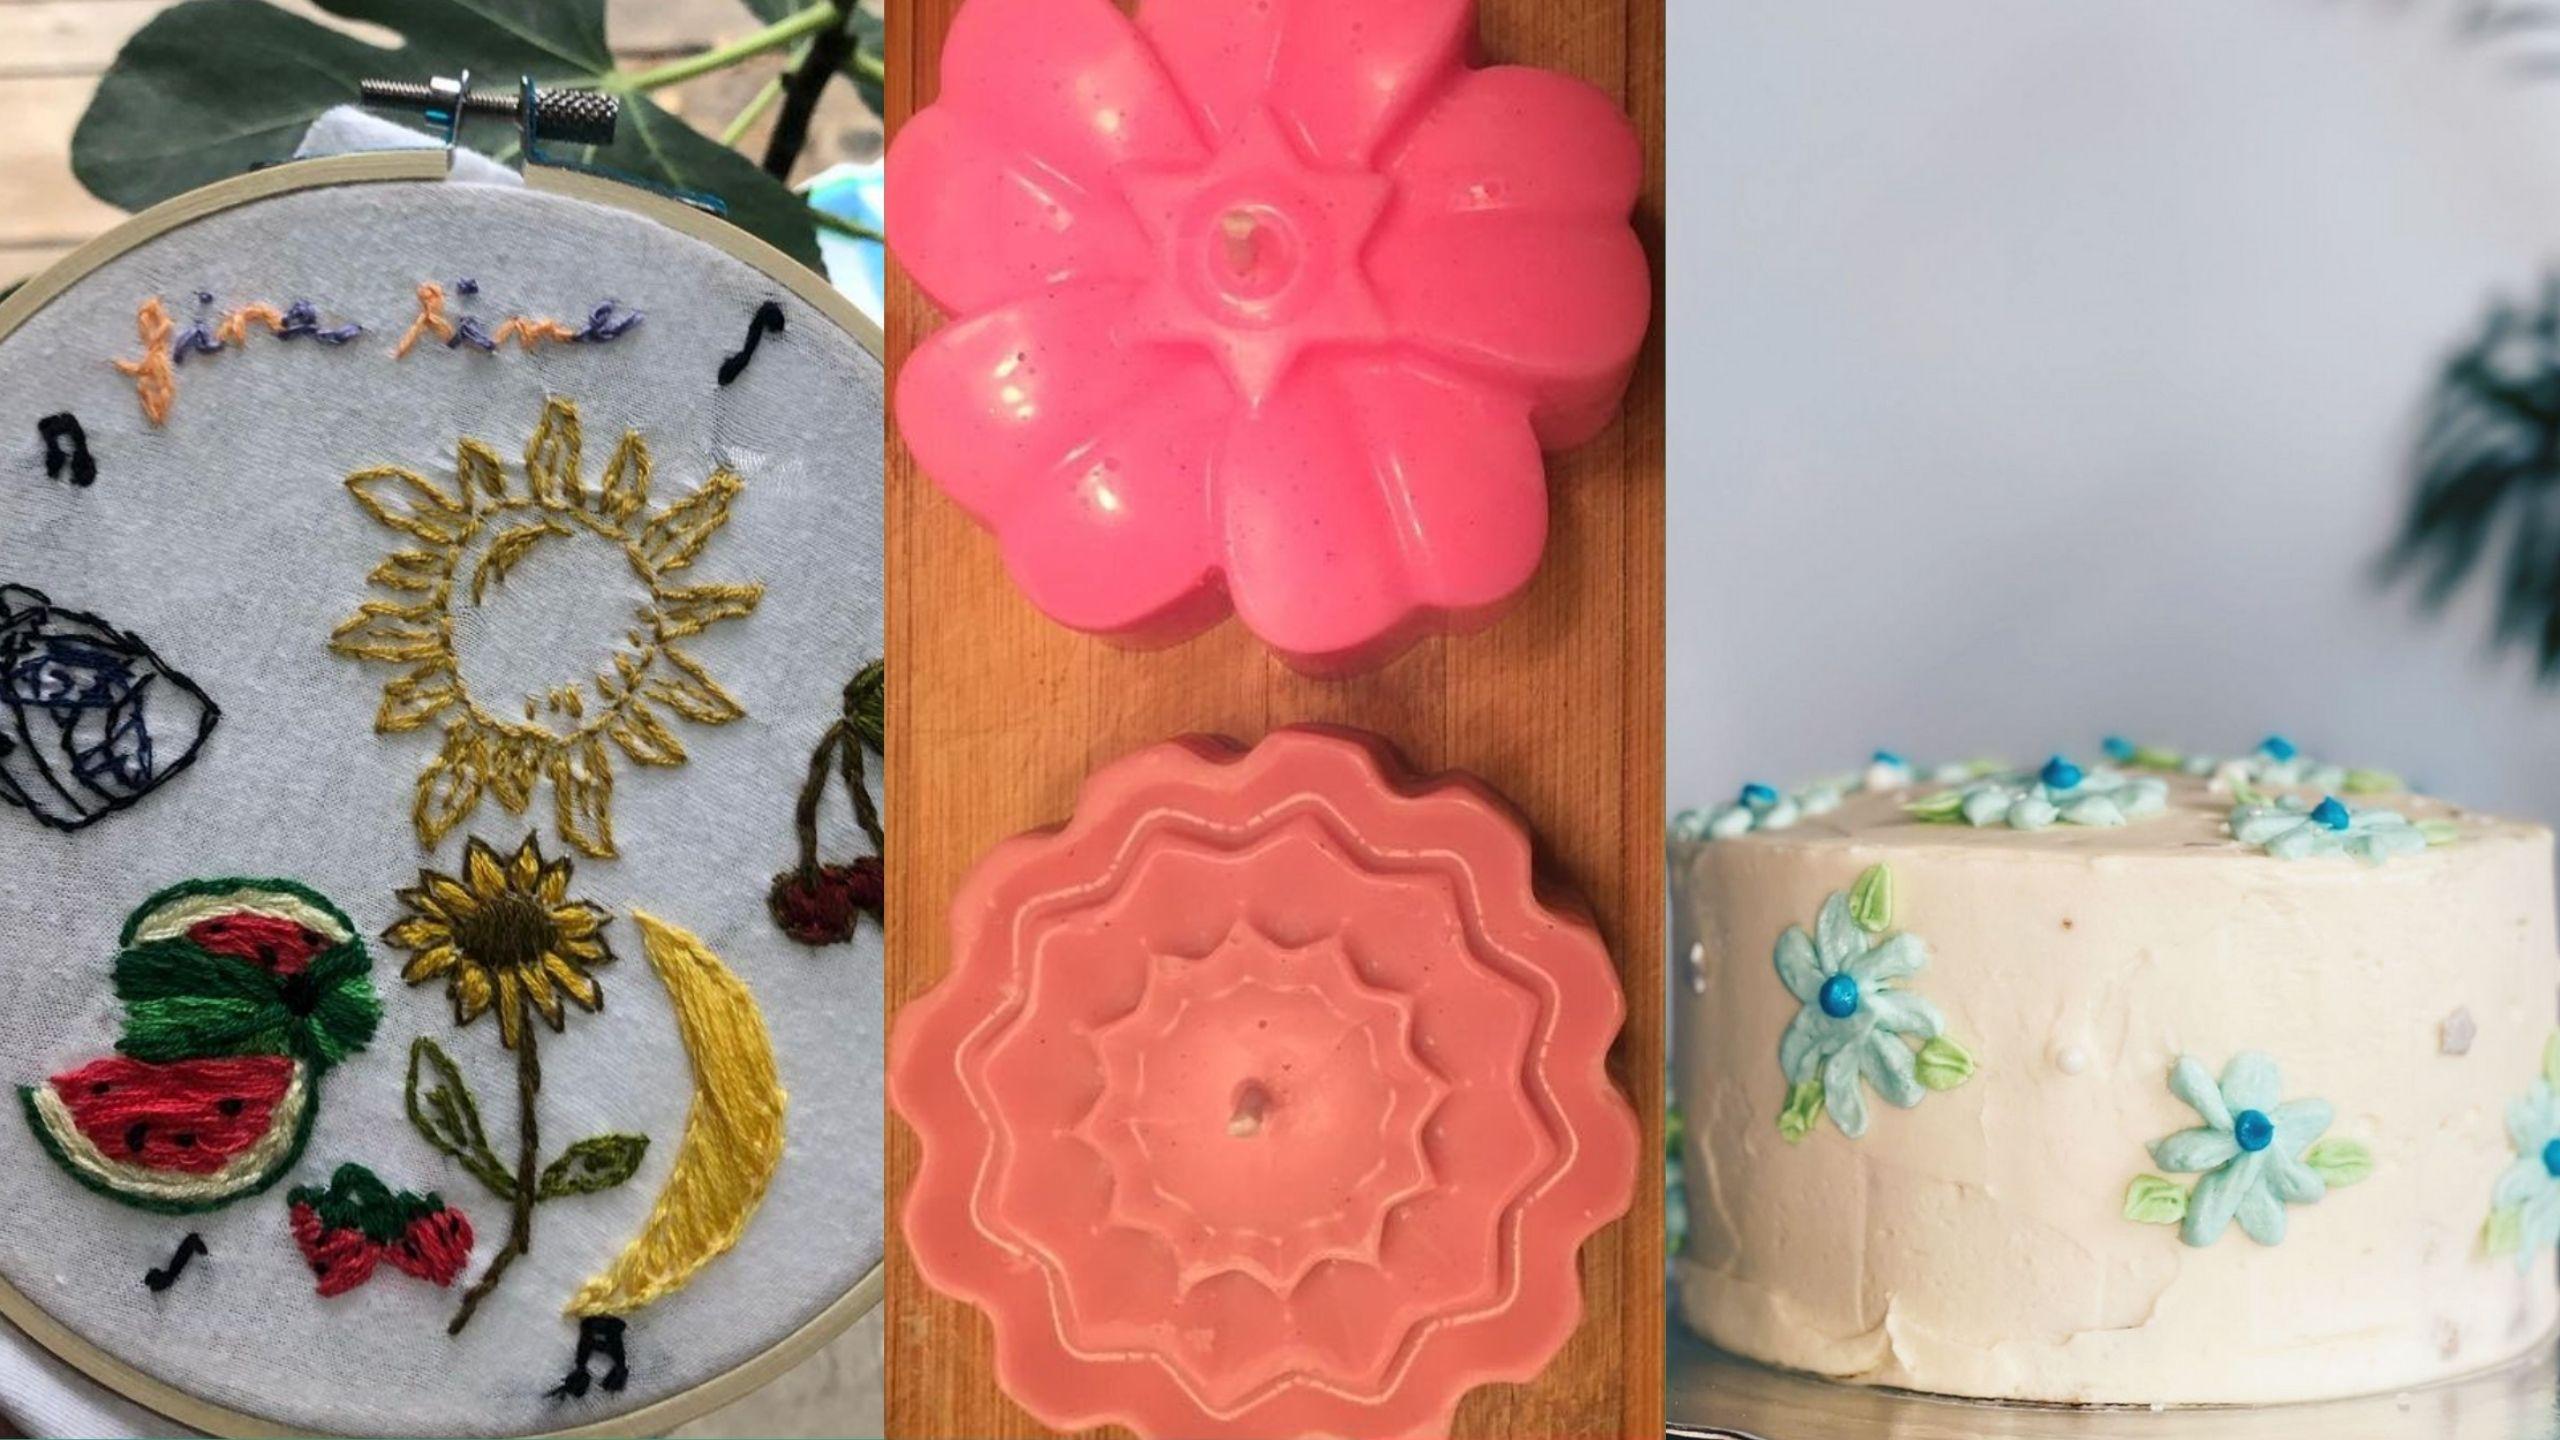 A photo of embroidery, candles, and a cake